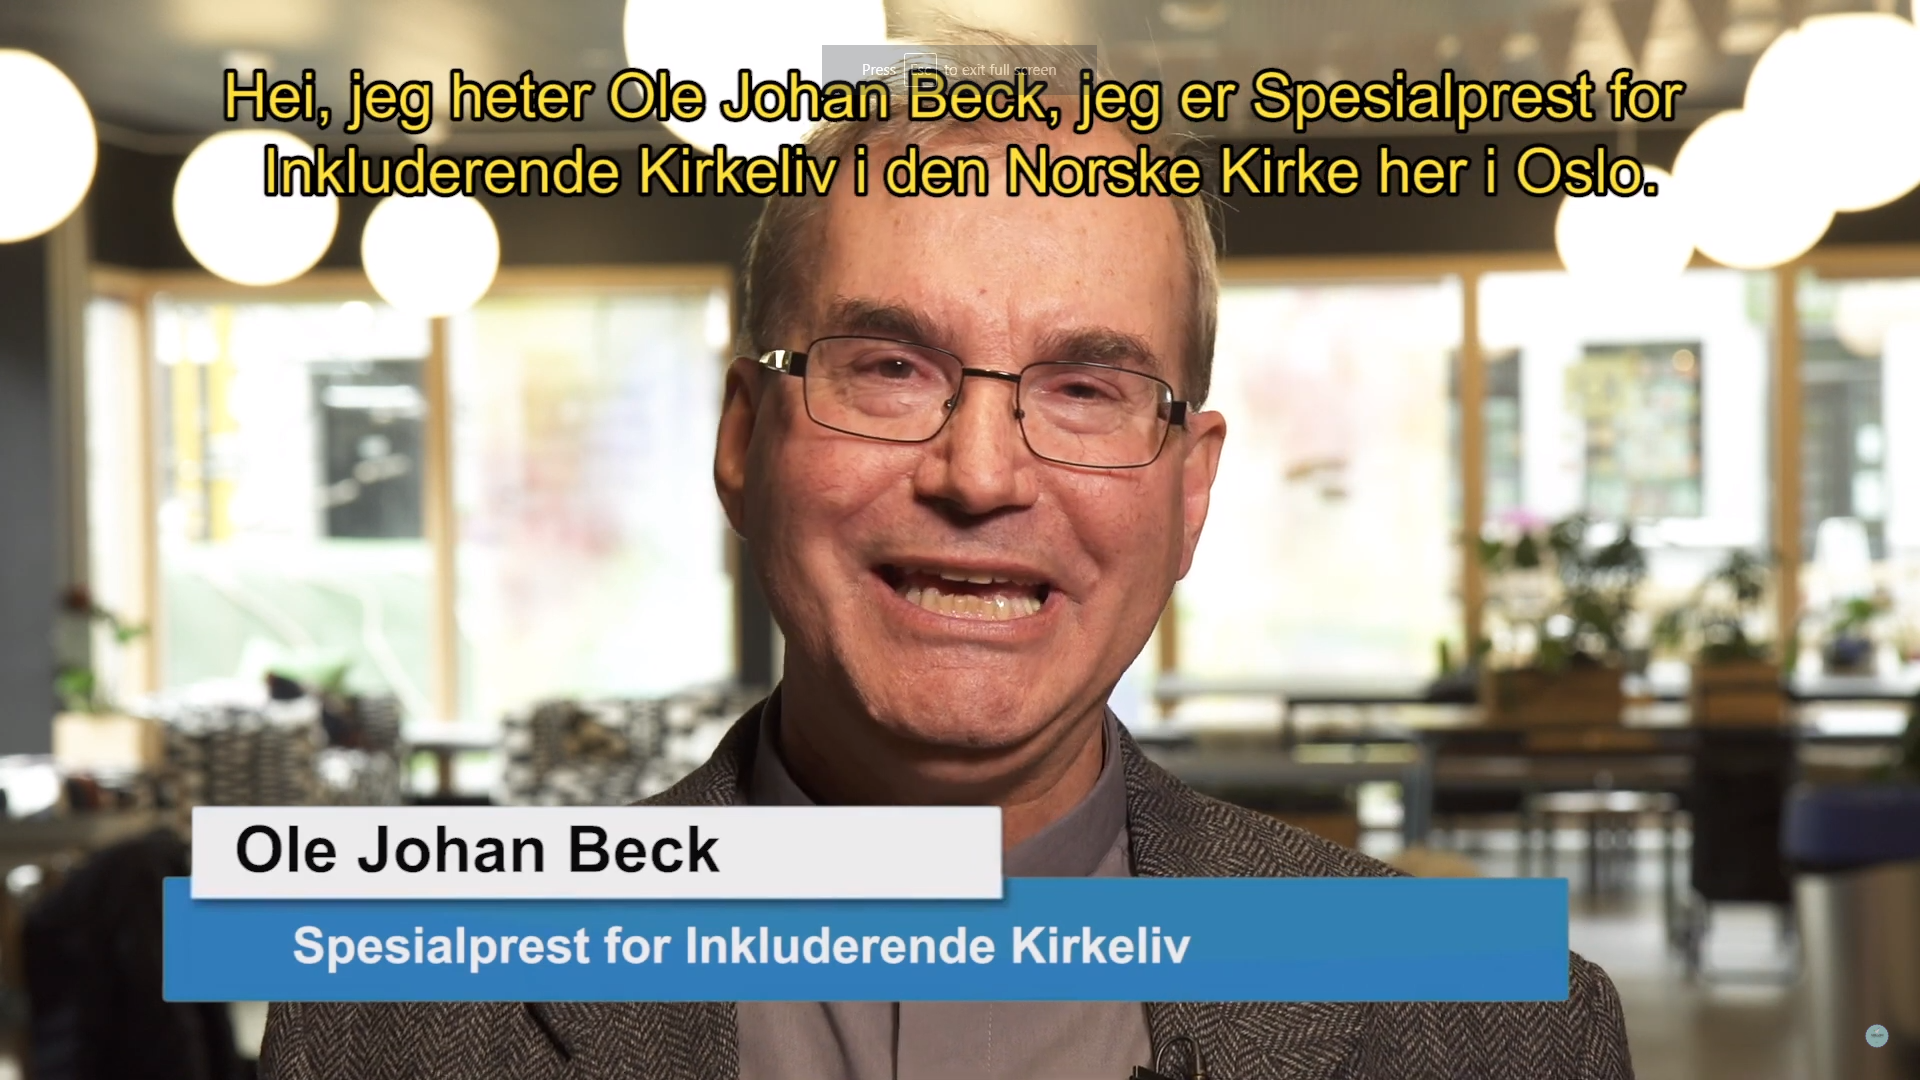 Appeal from special priest Ole Johan Beck